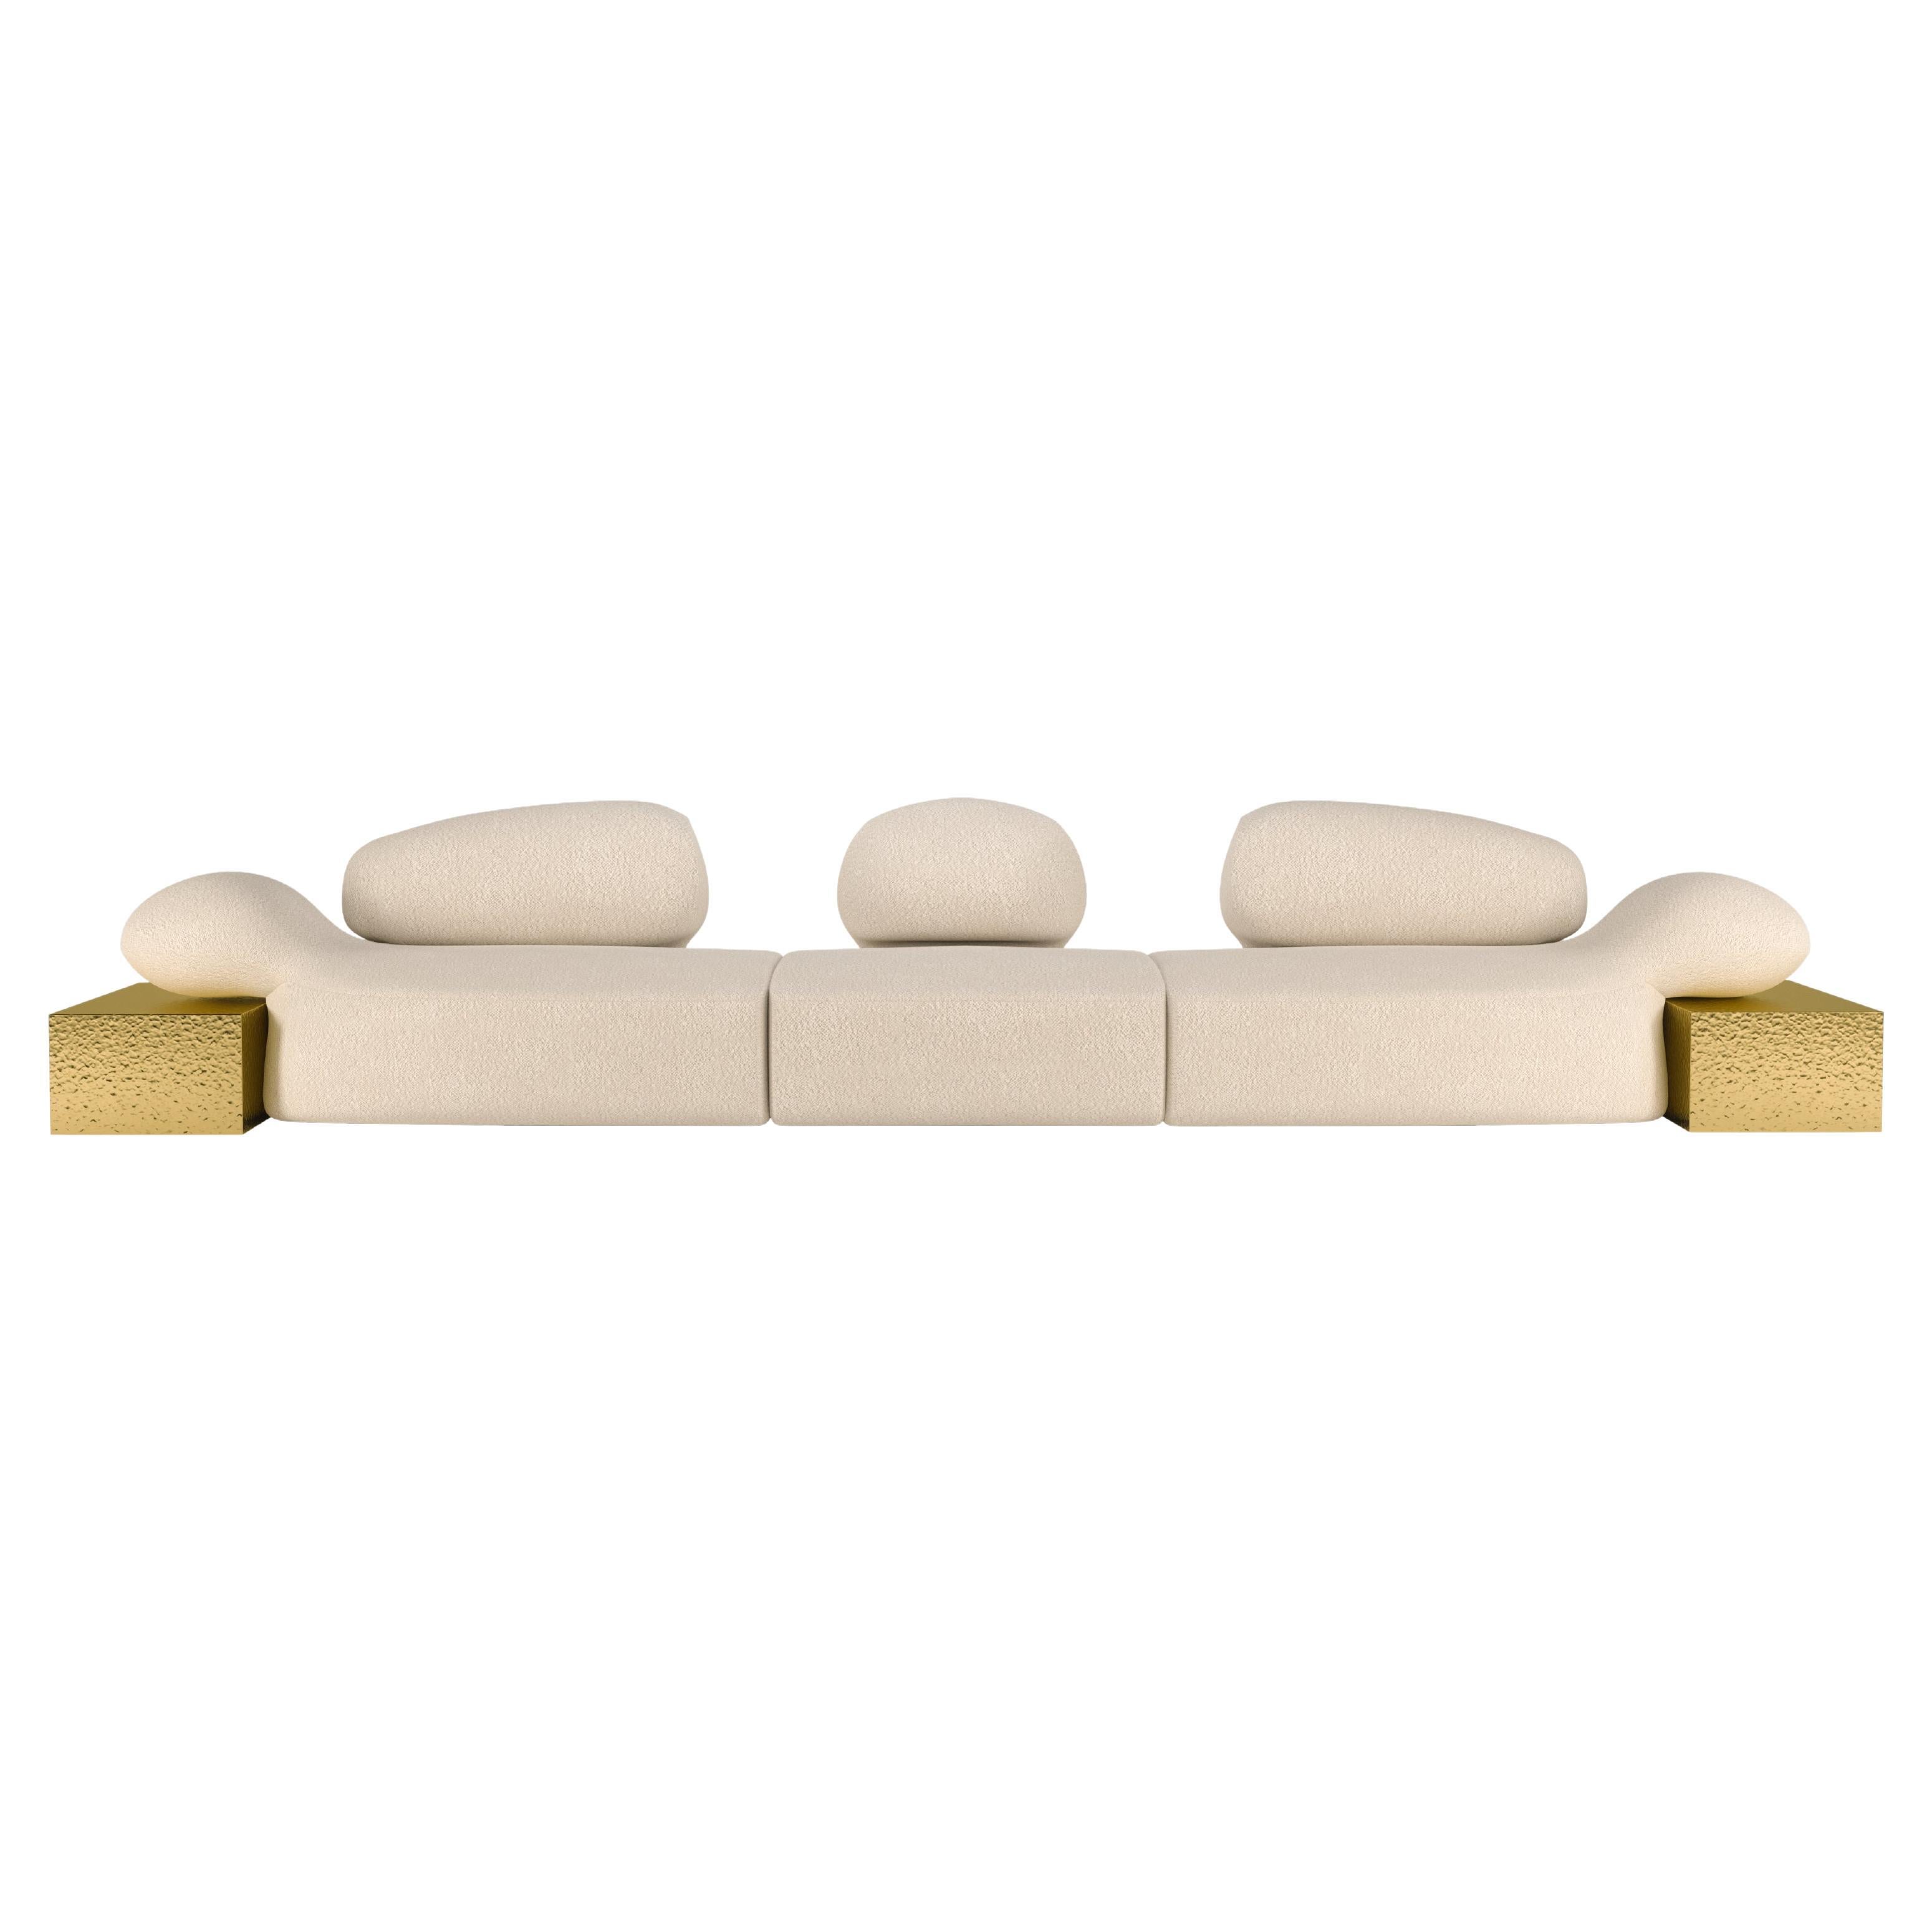 21st Viv Id II Sofa Metlted Hammered Brass and Bouclé For Sale